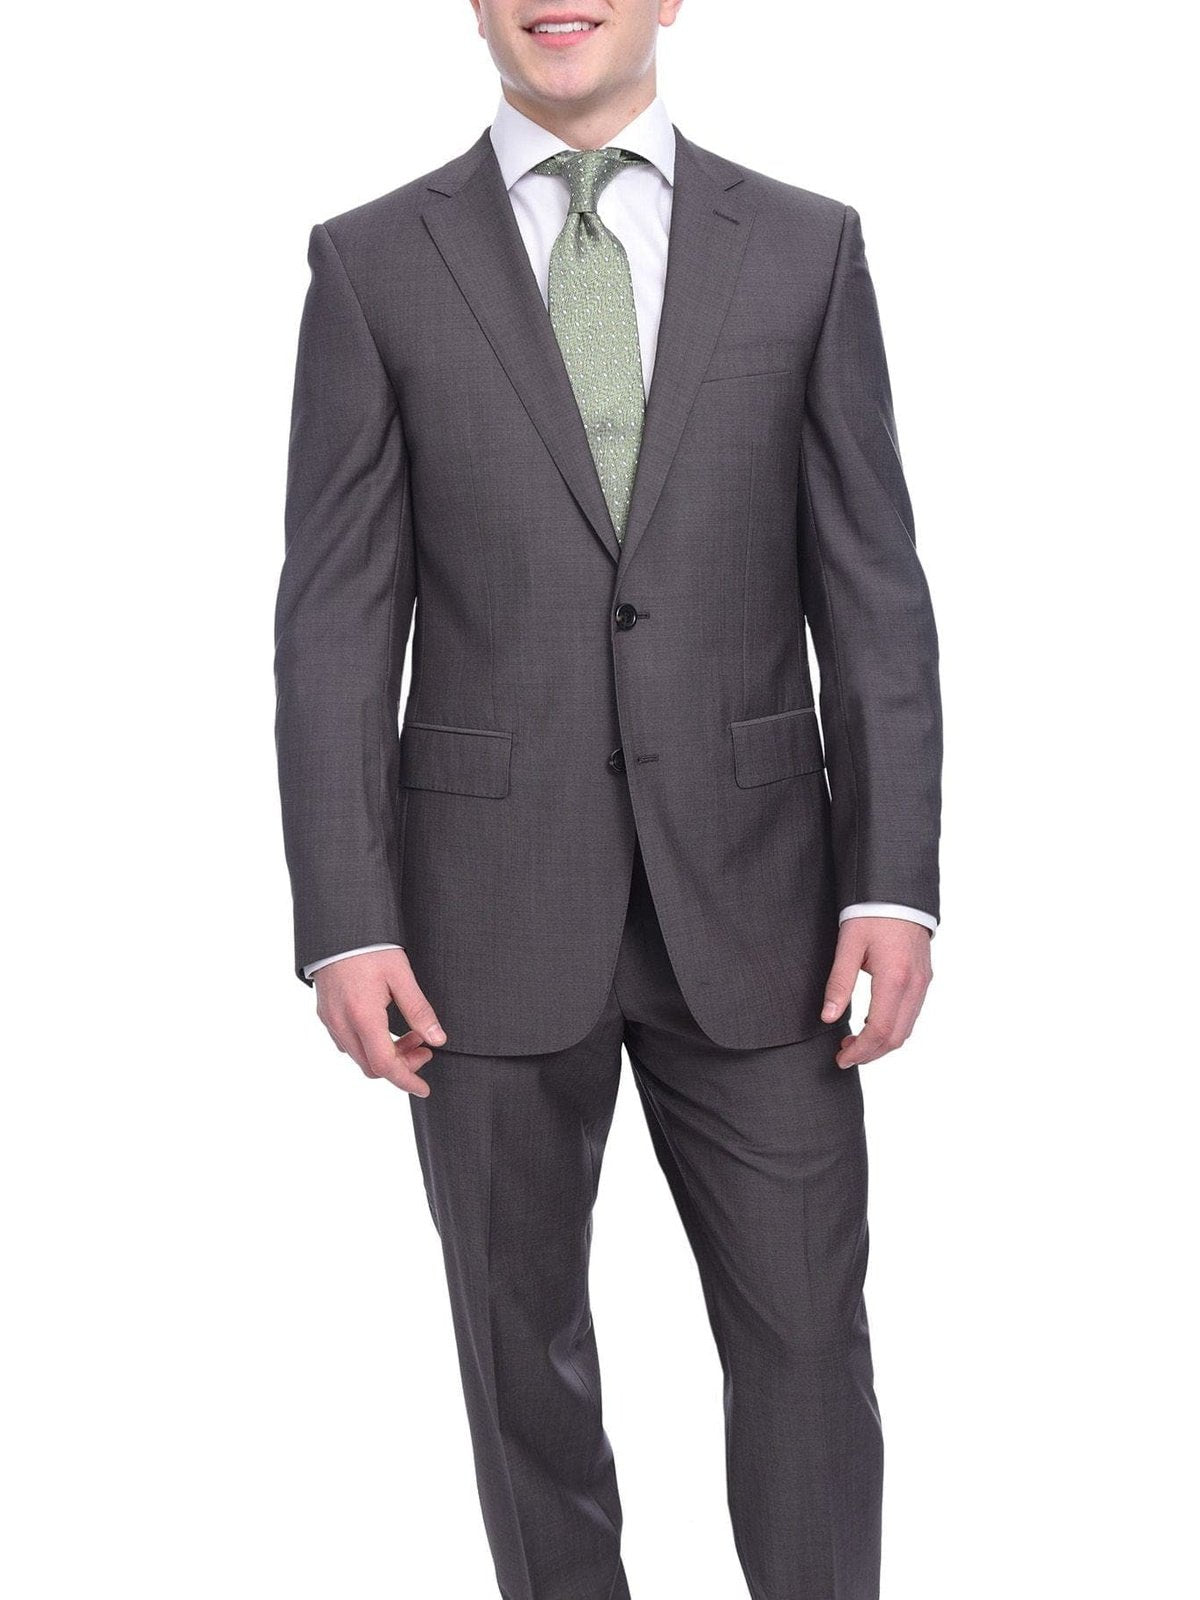 Napoli Slim Fit Solid Gray Half Canvassed Super 150s Marzotto Wool Suit